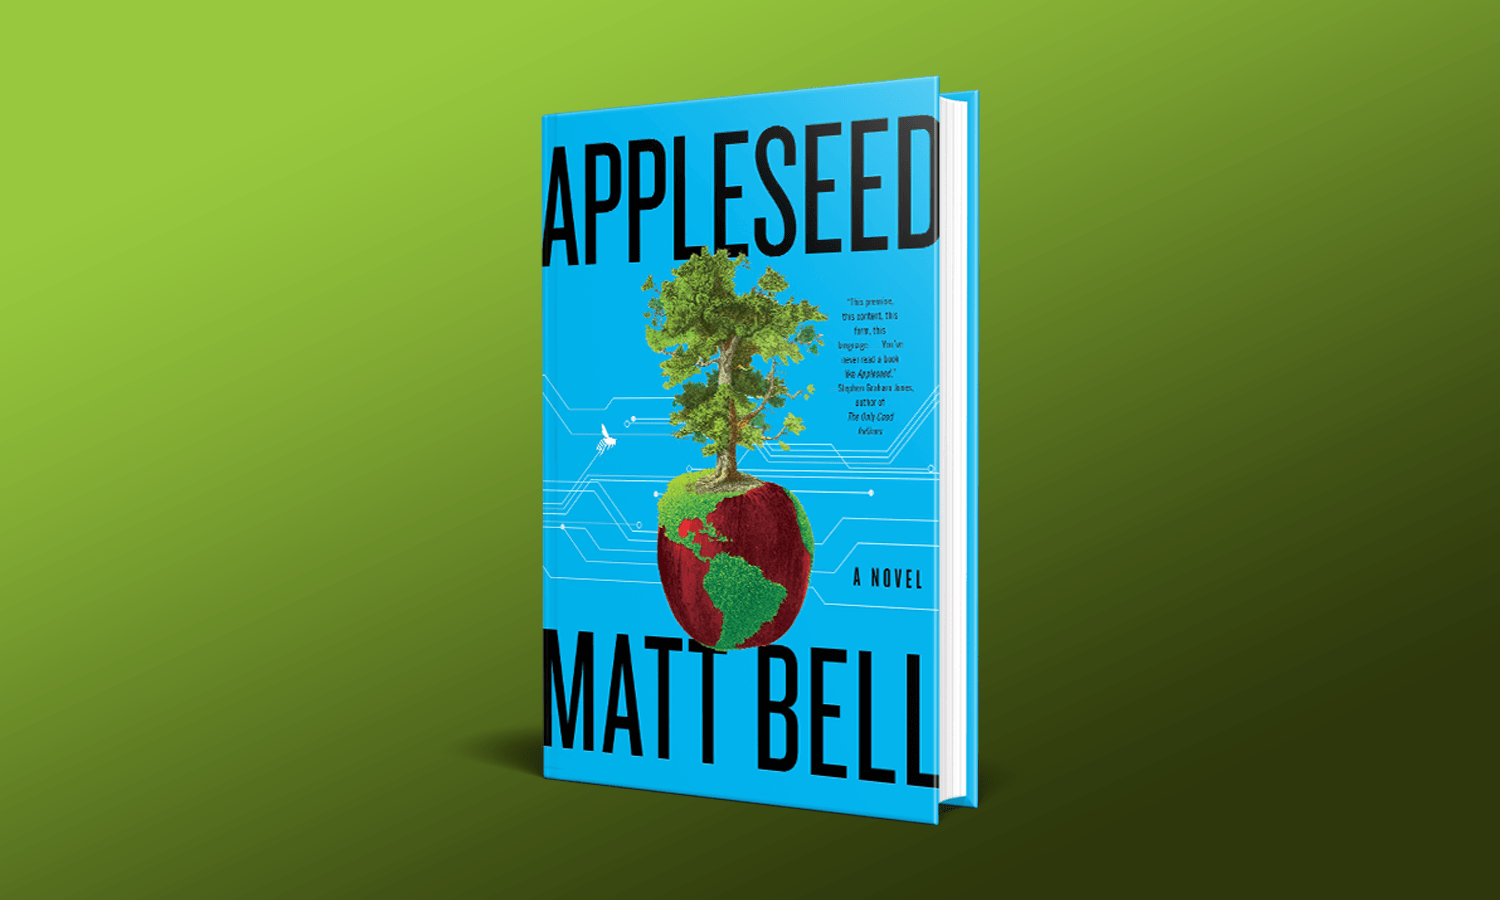 How to Request a Free Appleseed's Catalog by Mail